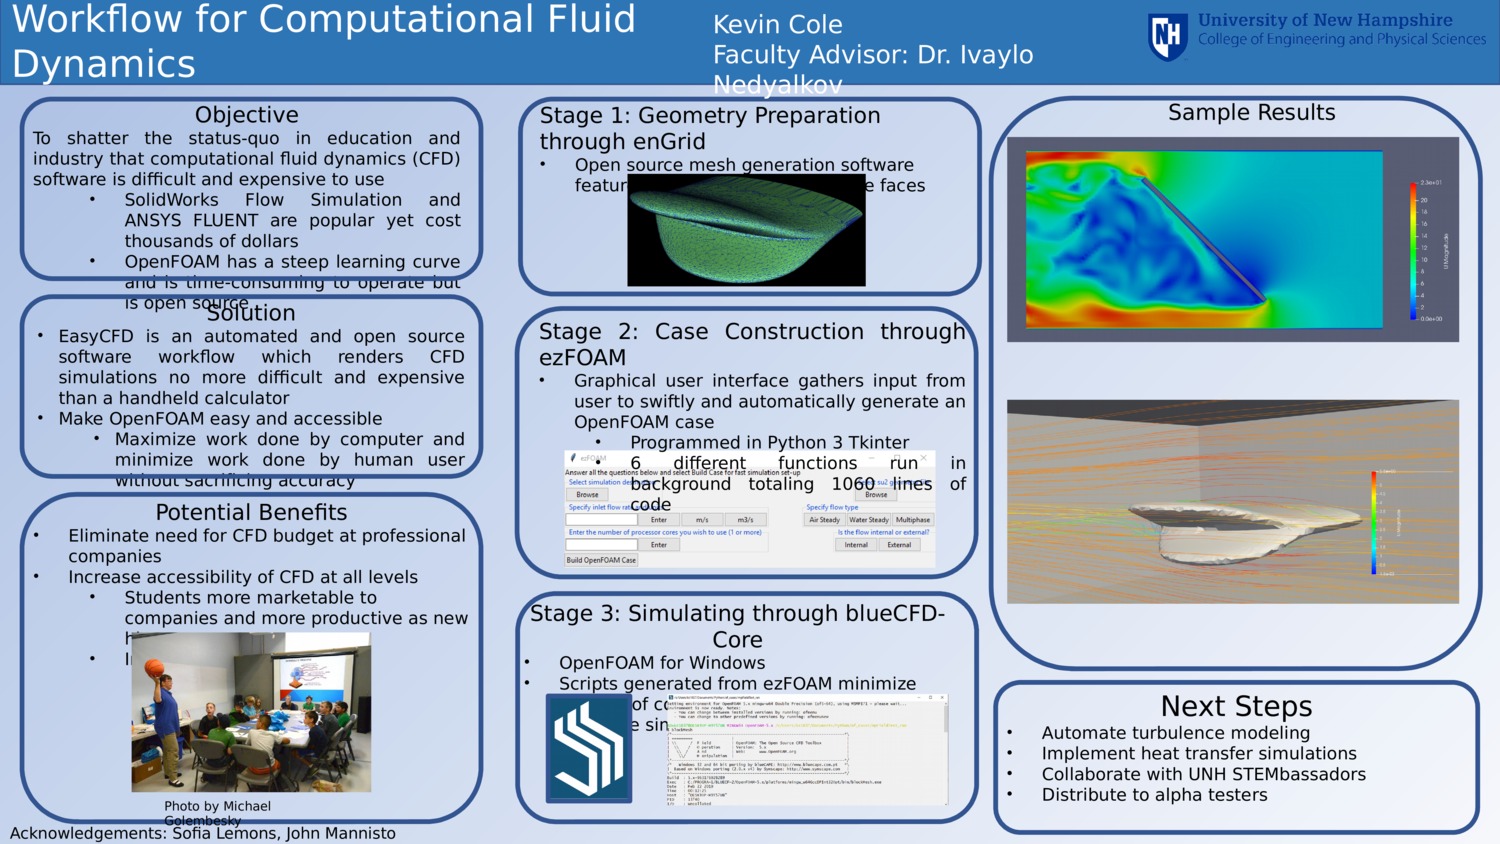 Easycfd: Automated Open Source Workflow For Computational Fluid Dynamics by kc1037